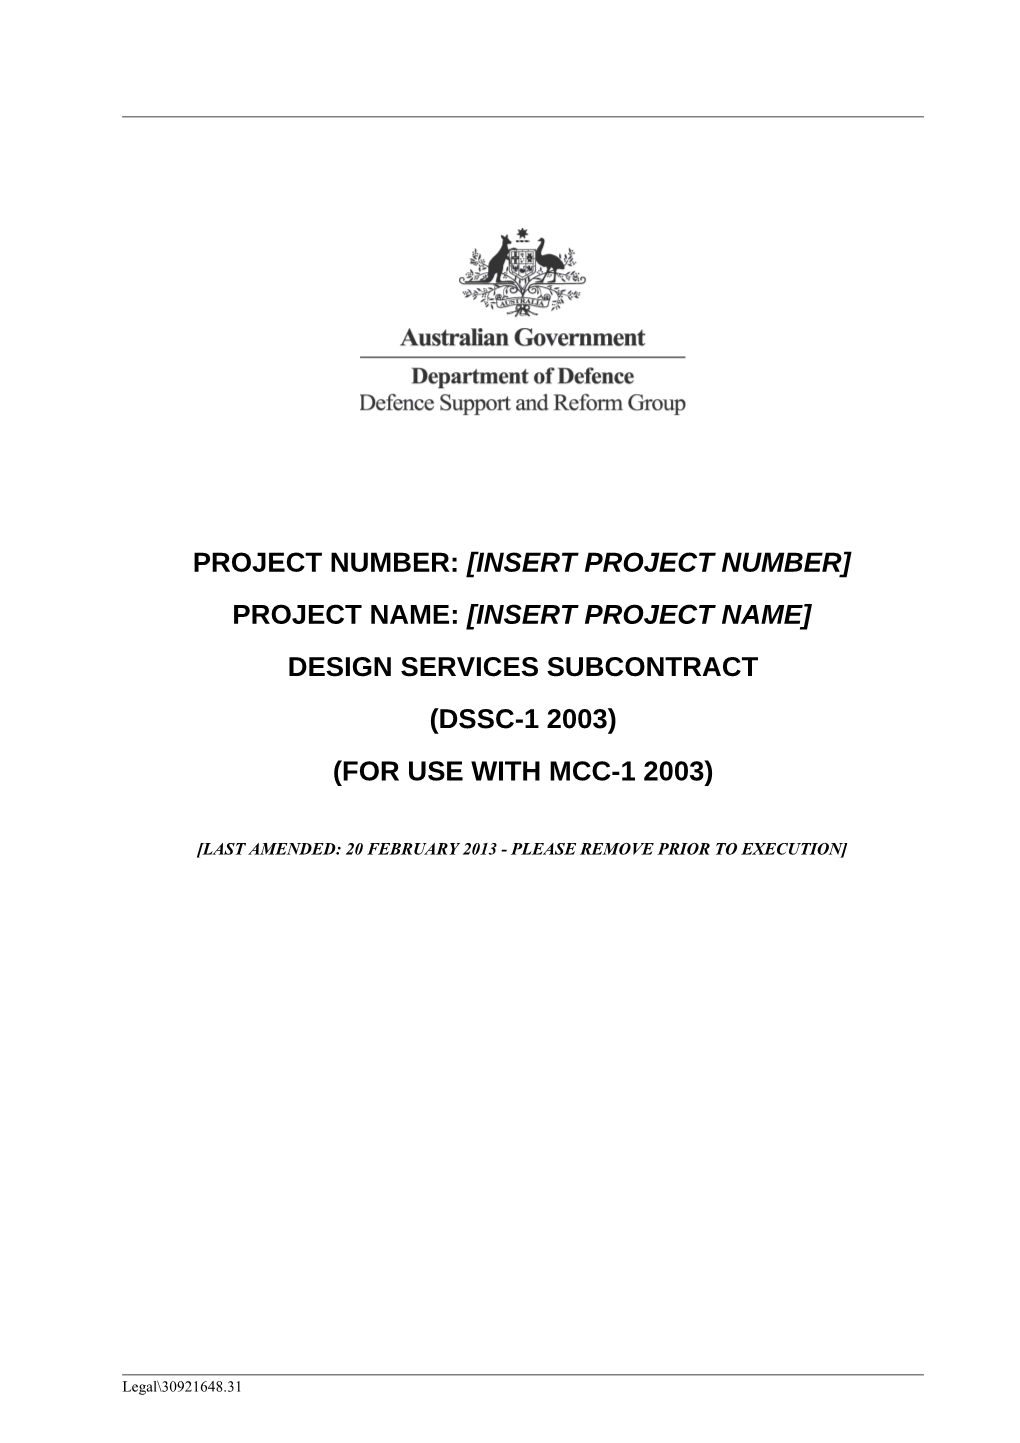 Department of Defence - Design Services Subcontract (DSSC-1 2003) - for Use with MCC-1 2003